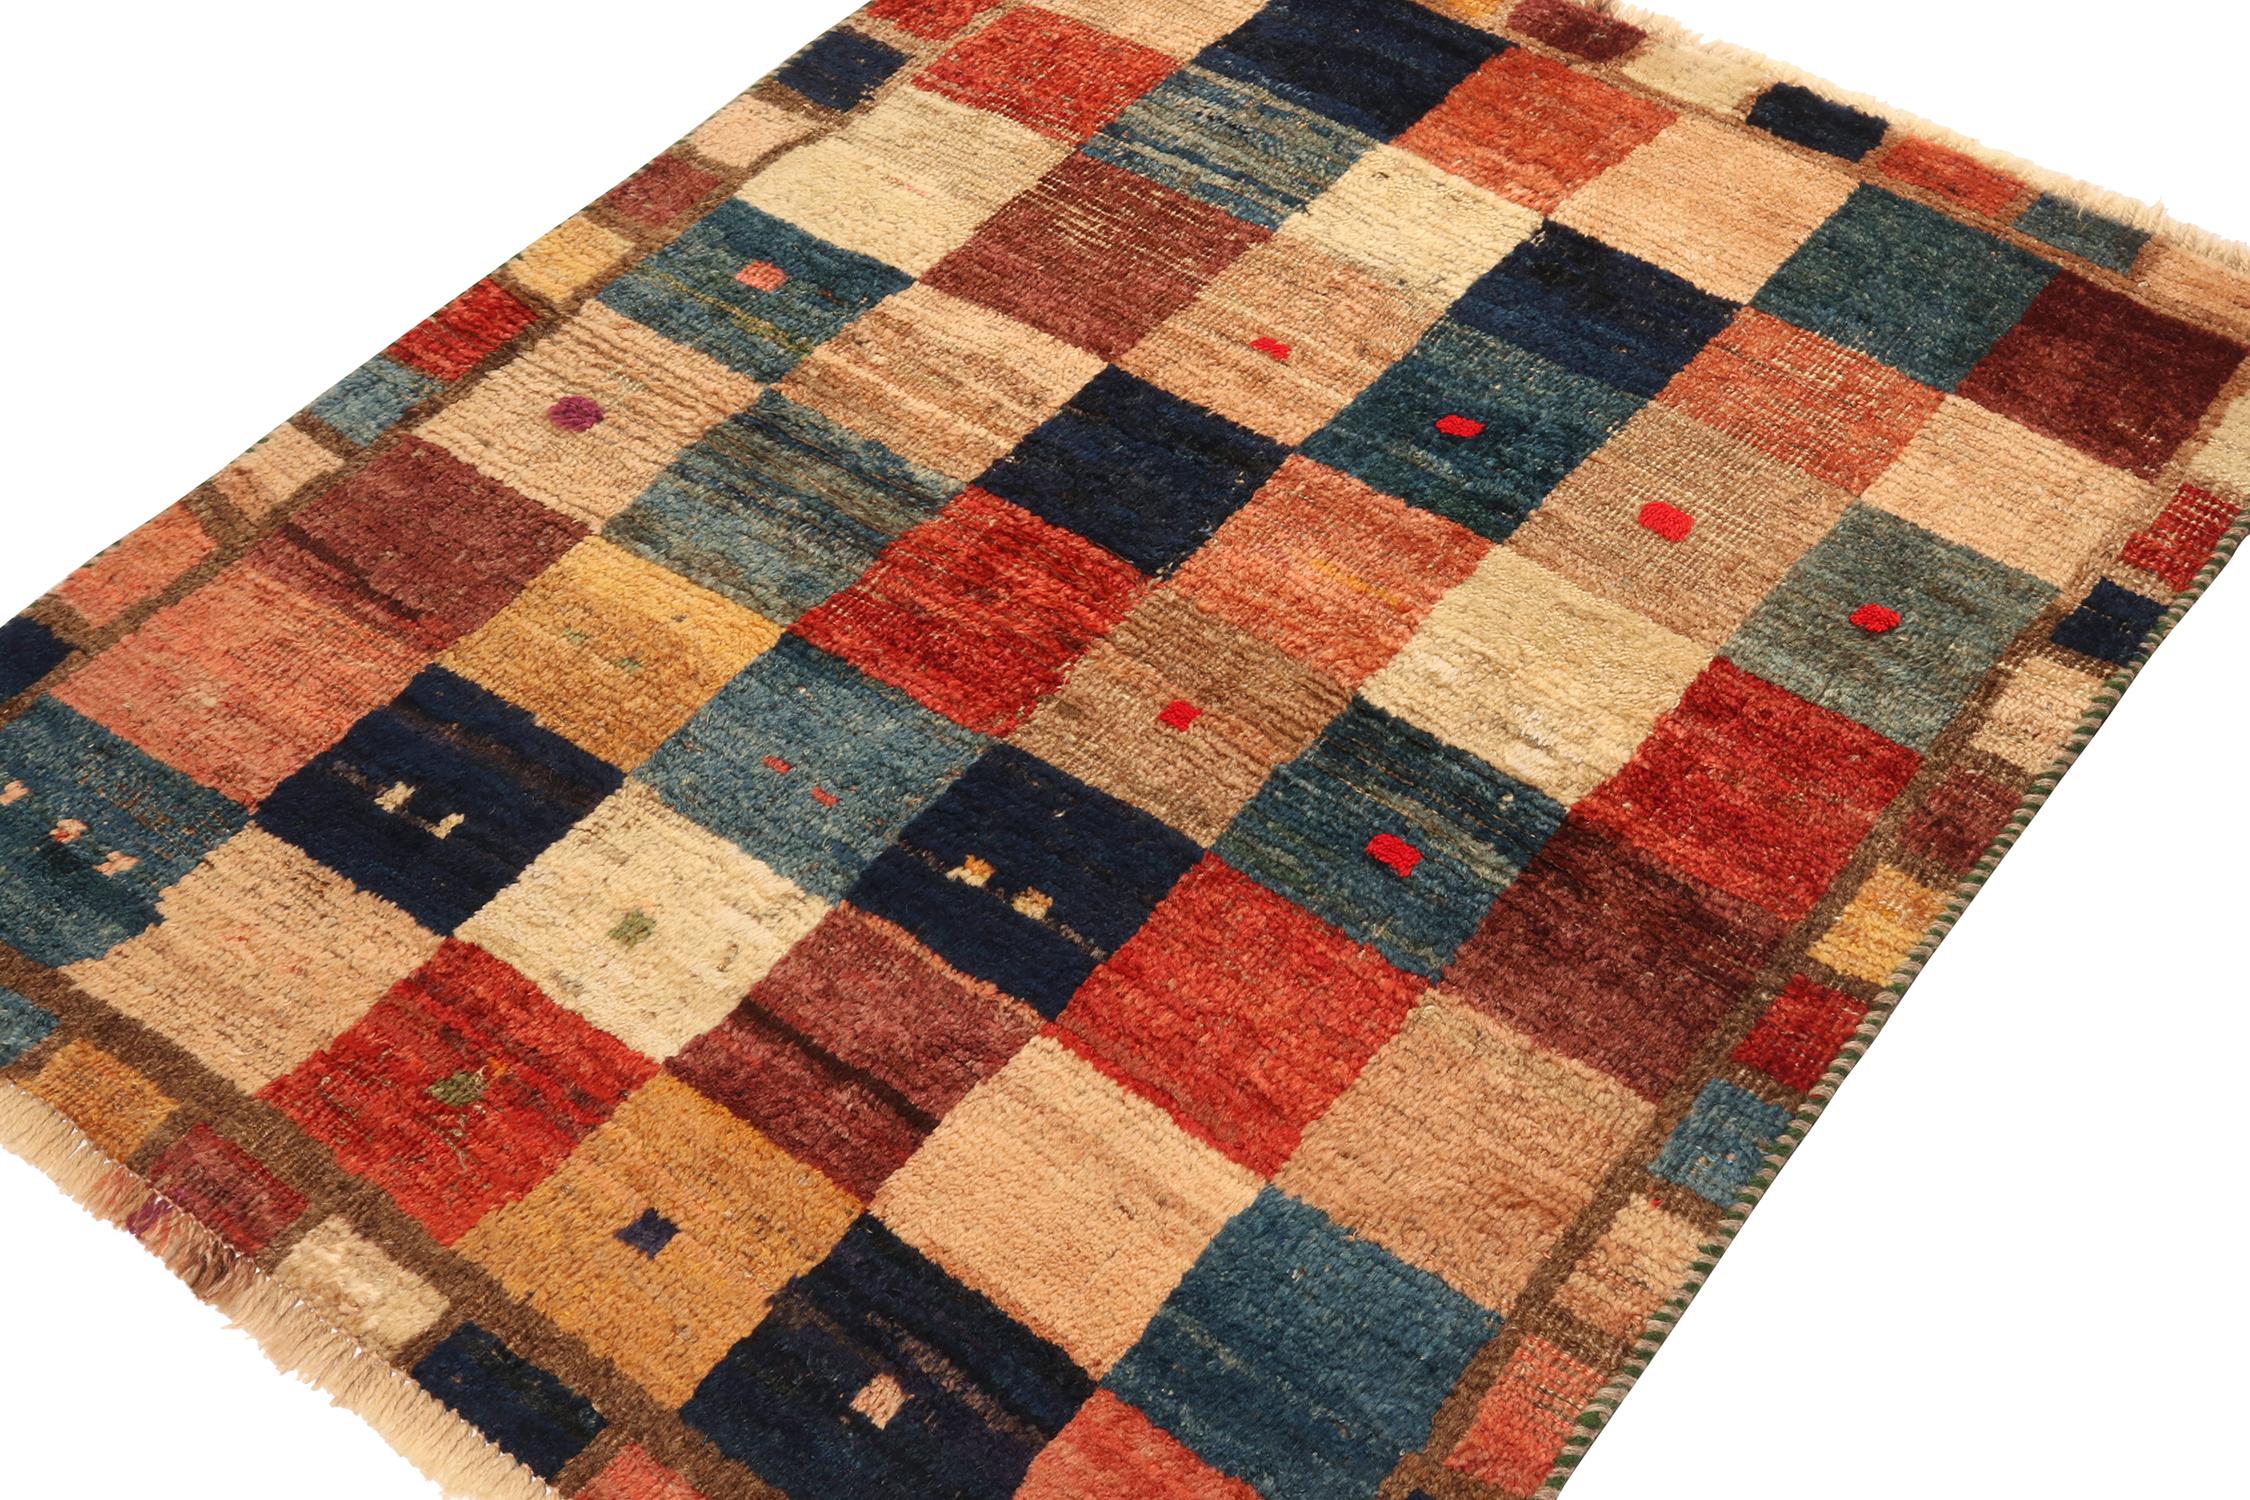 This vintage 3x4 Persian Gabbeh rug makes a splendid entry to Rug & Kilim’s curation of rare tribal pieces. Hand-knotted in wool circa 1950-1960.

On the design:

The piece features a playful geometric pattern in a joyful colorplay of